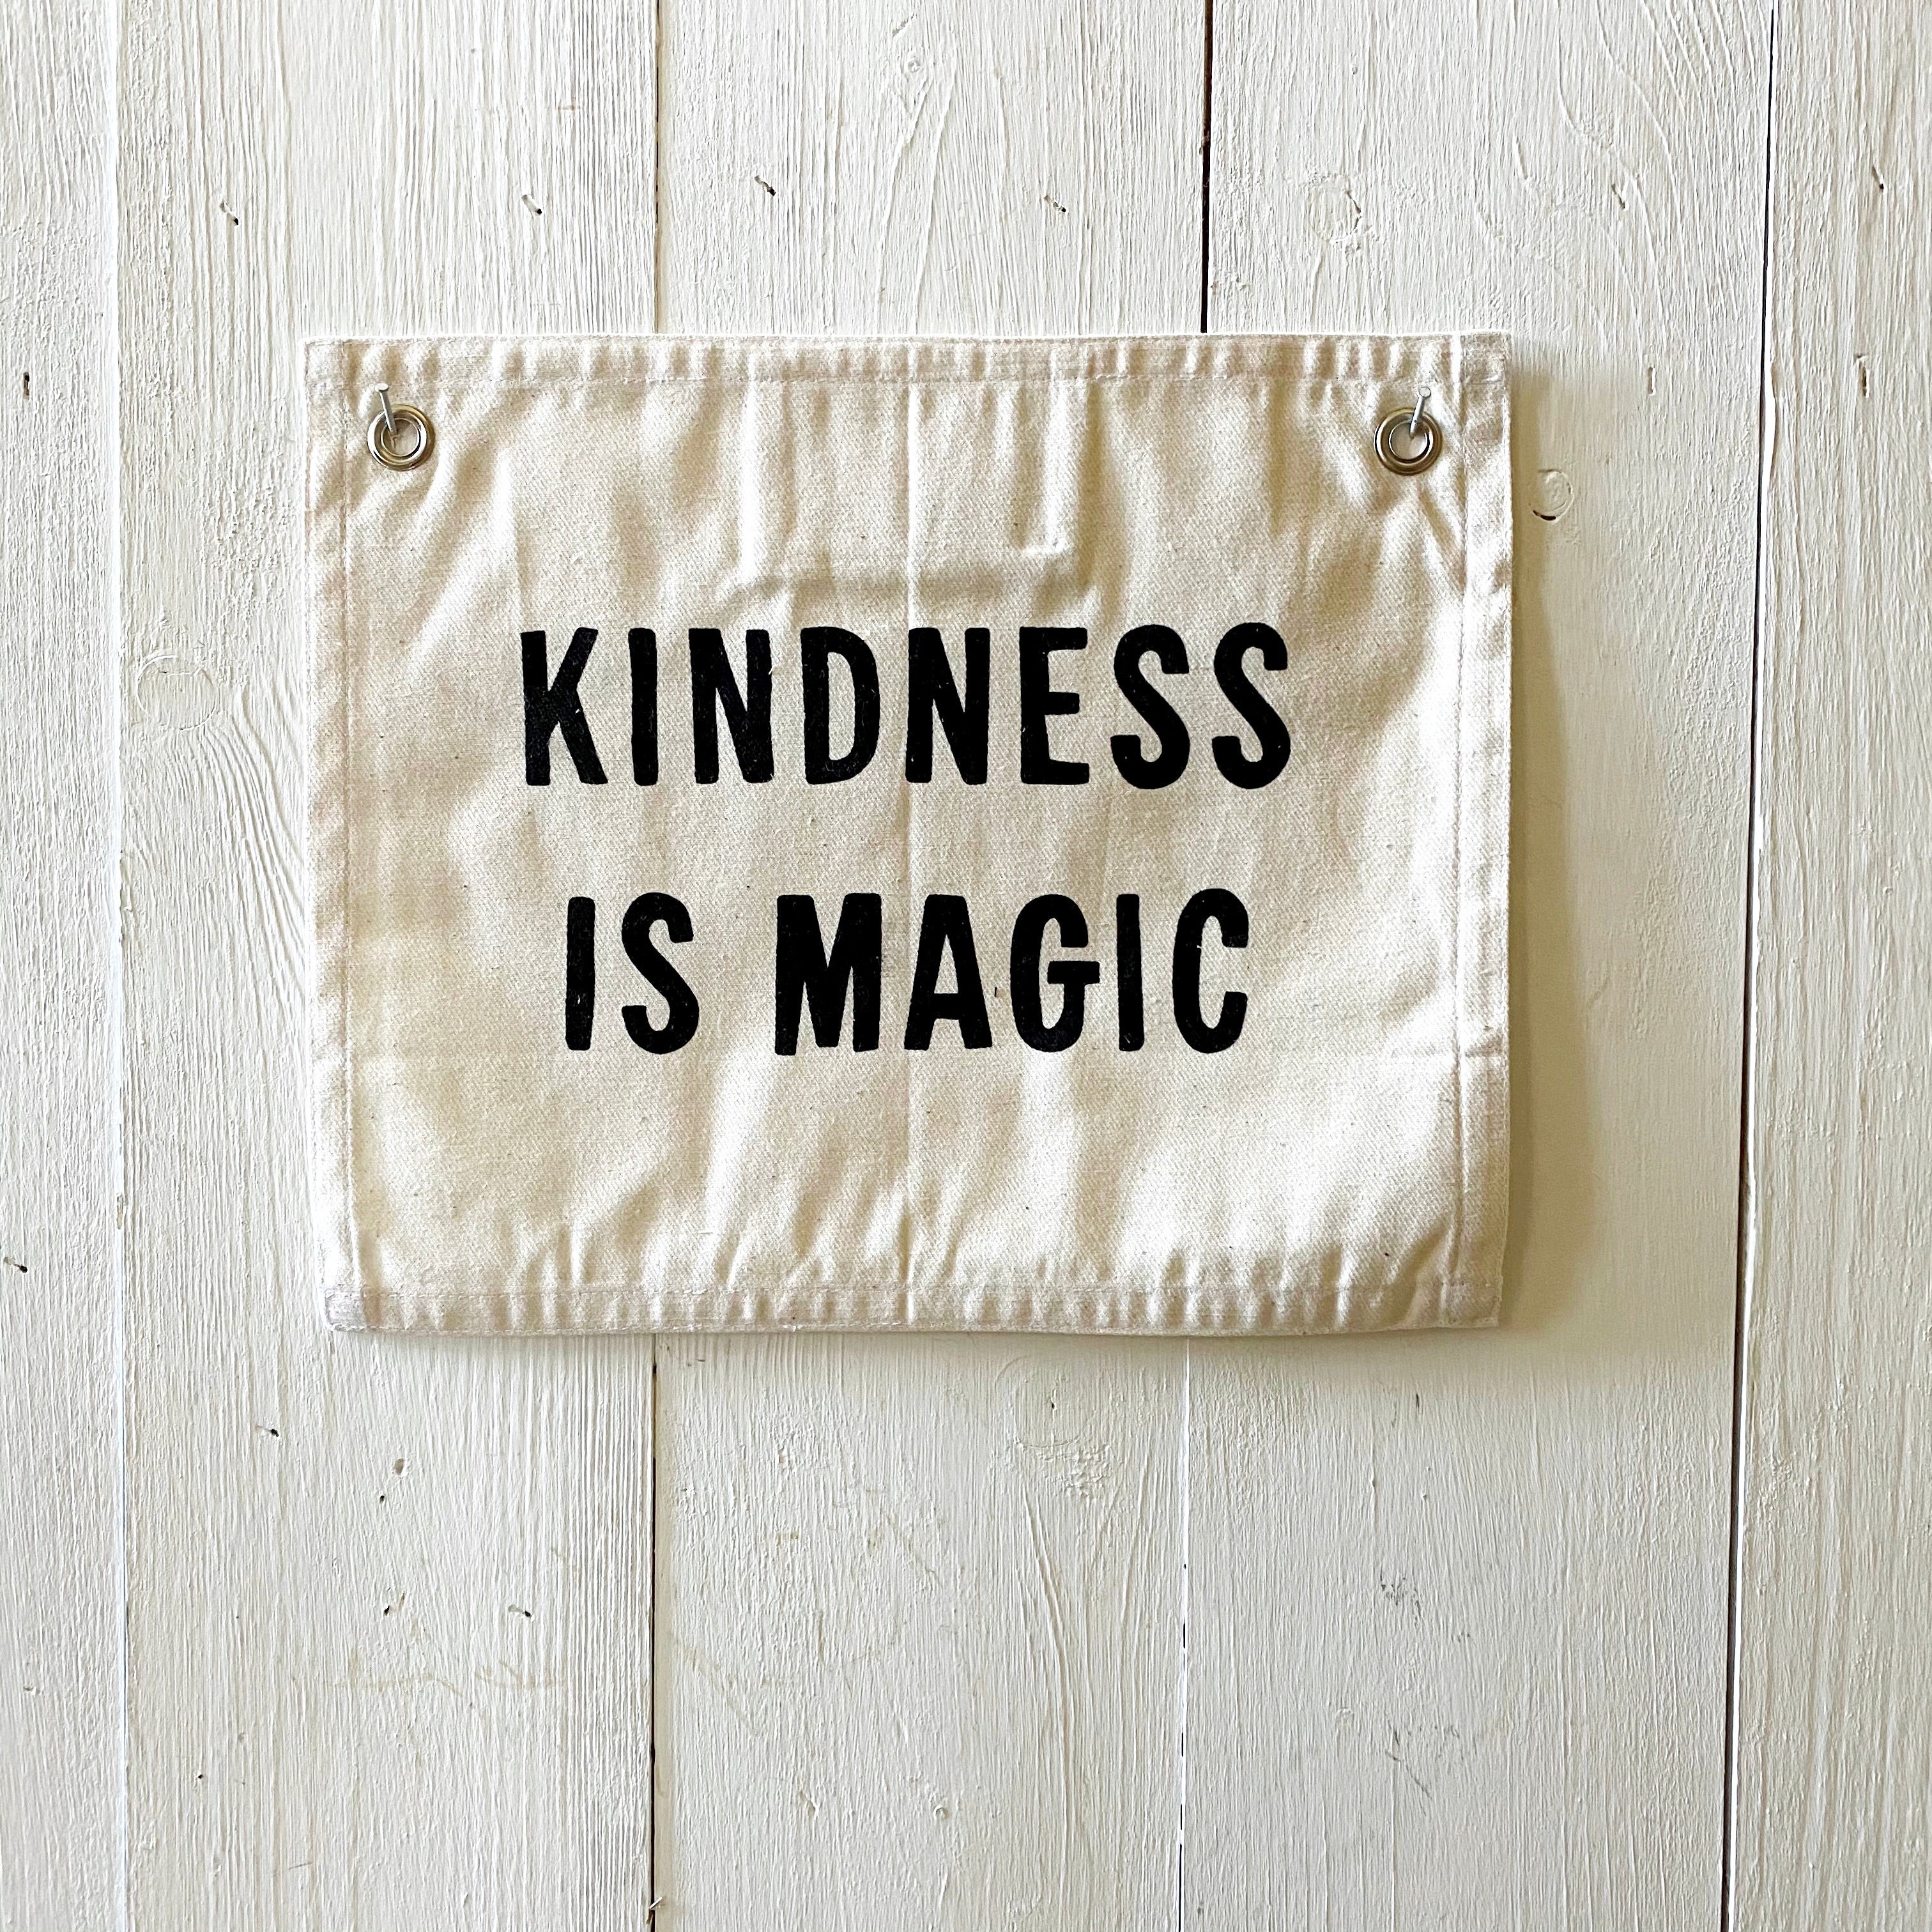 KINDNESS IS MAGIC BANNER {SHOP FOR A CAUSE}